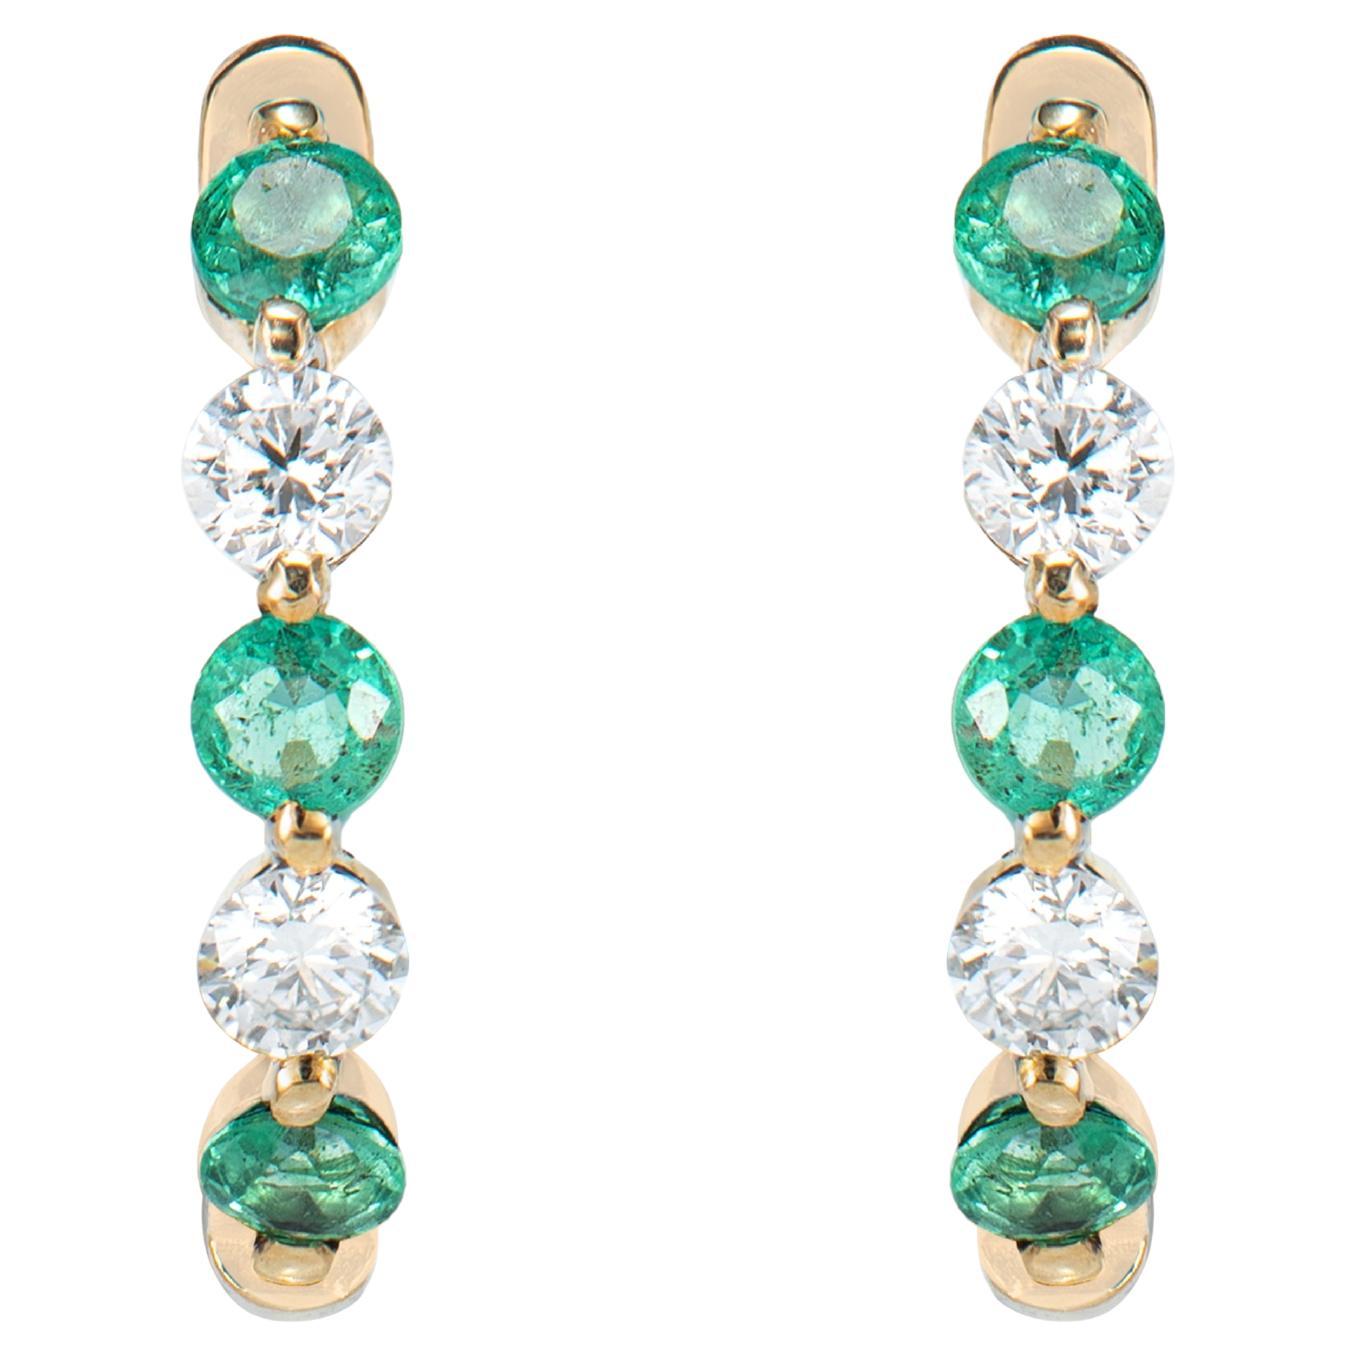 0.502 Carat Emerald Hoop Earrings in 14 Karat Yellow Gold with White Diamond For Sale